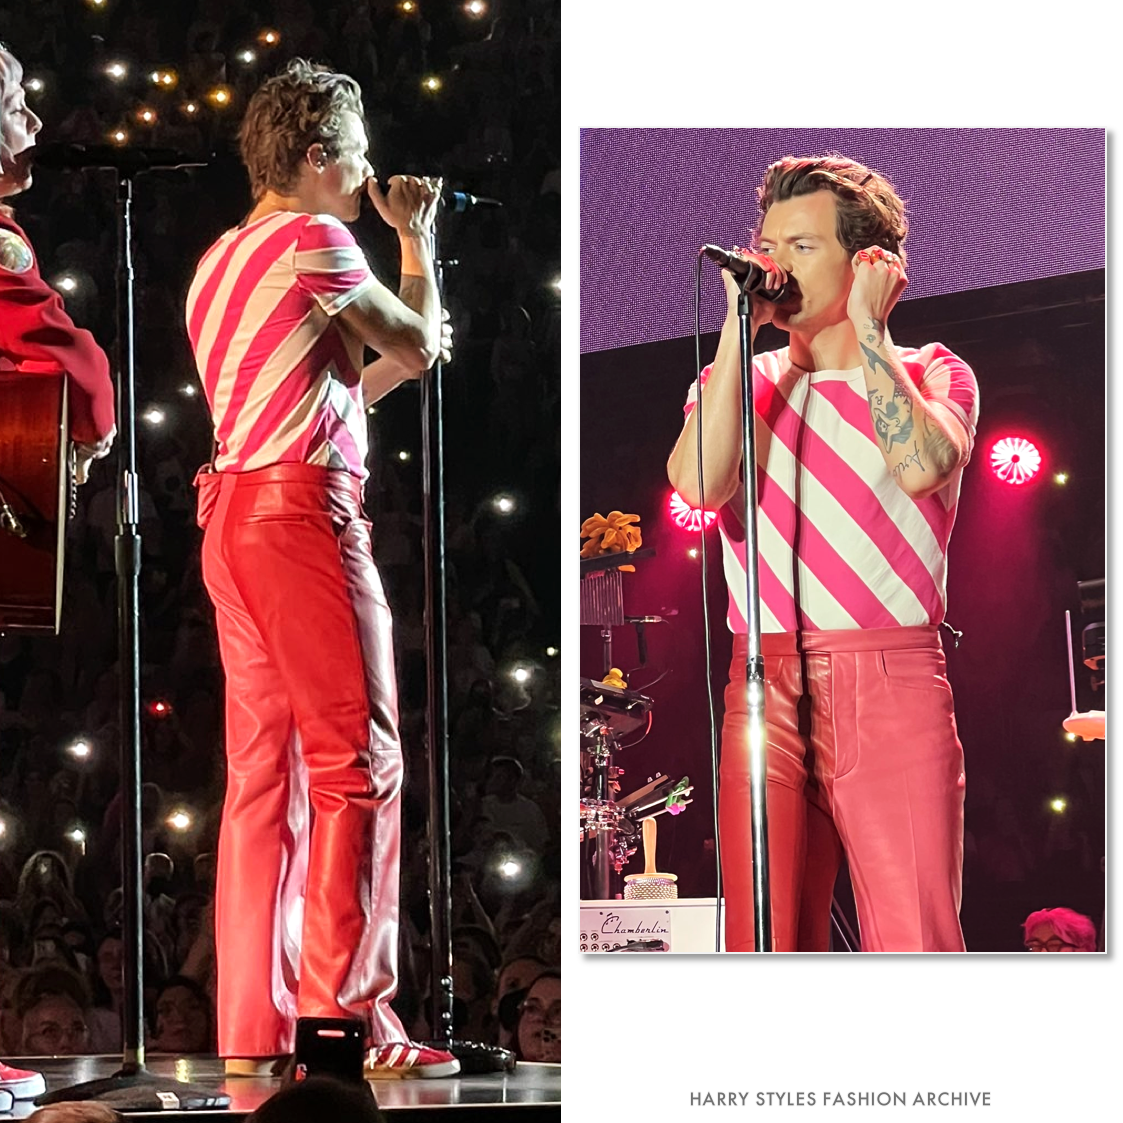 Harry Styles Lookbook on Twitter For OneNightOnlyNY Harry wore a custom  Gucci look featuring a heart printed ringer Tshirt and wideleg leather  trousers httpstcosYXfhp0OD0  morethanhabits  httpstcoTxcofpQpjB  X